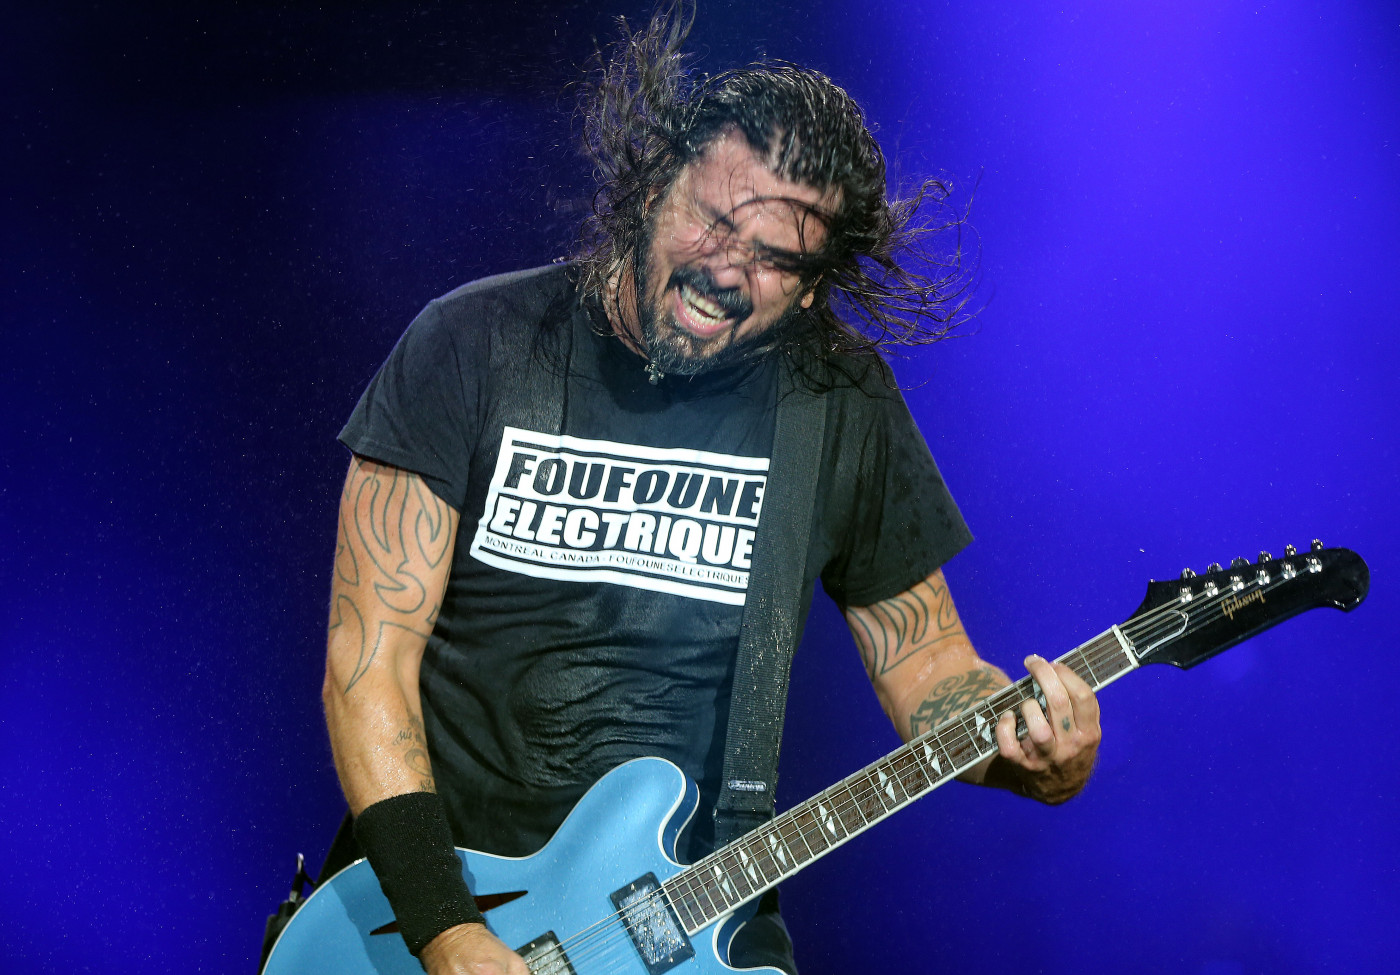 Dave Grohl Brasil  Dave grohl, Foo fighters dave grohl, Foo